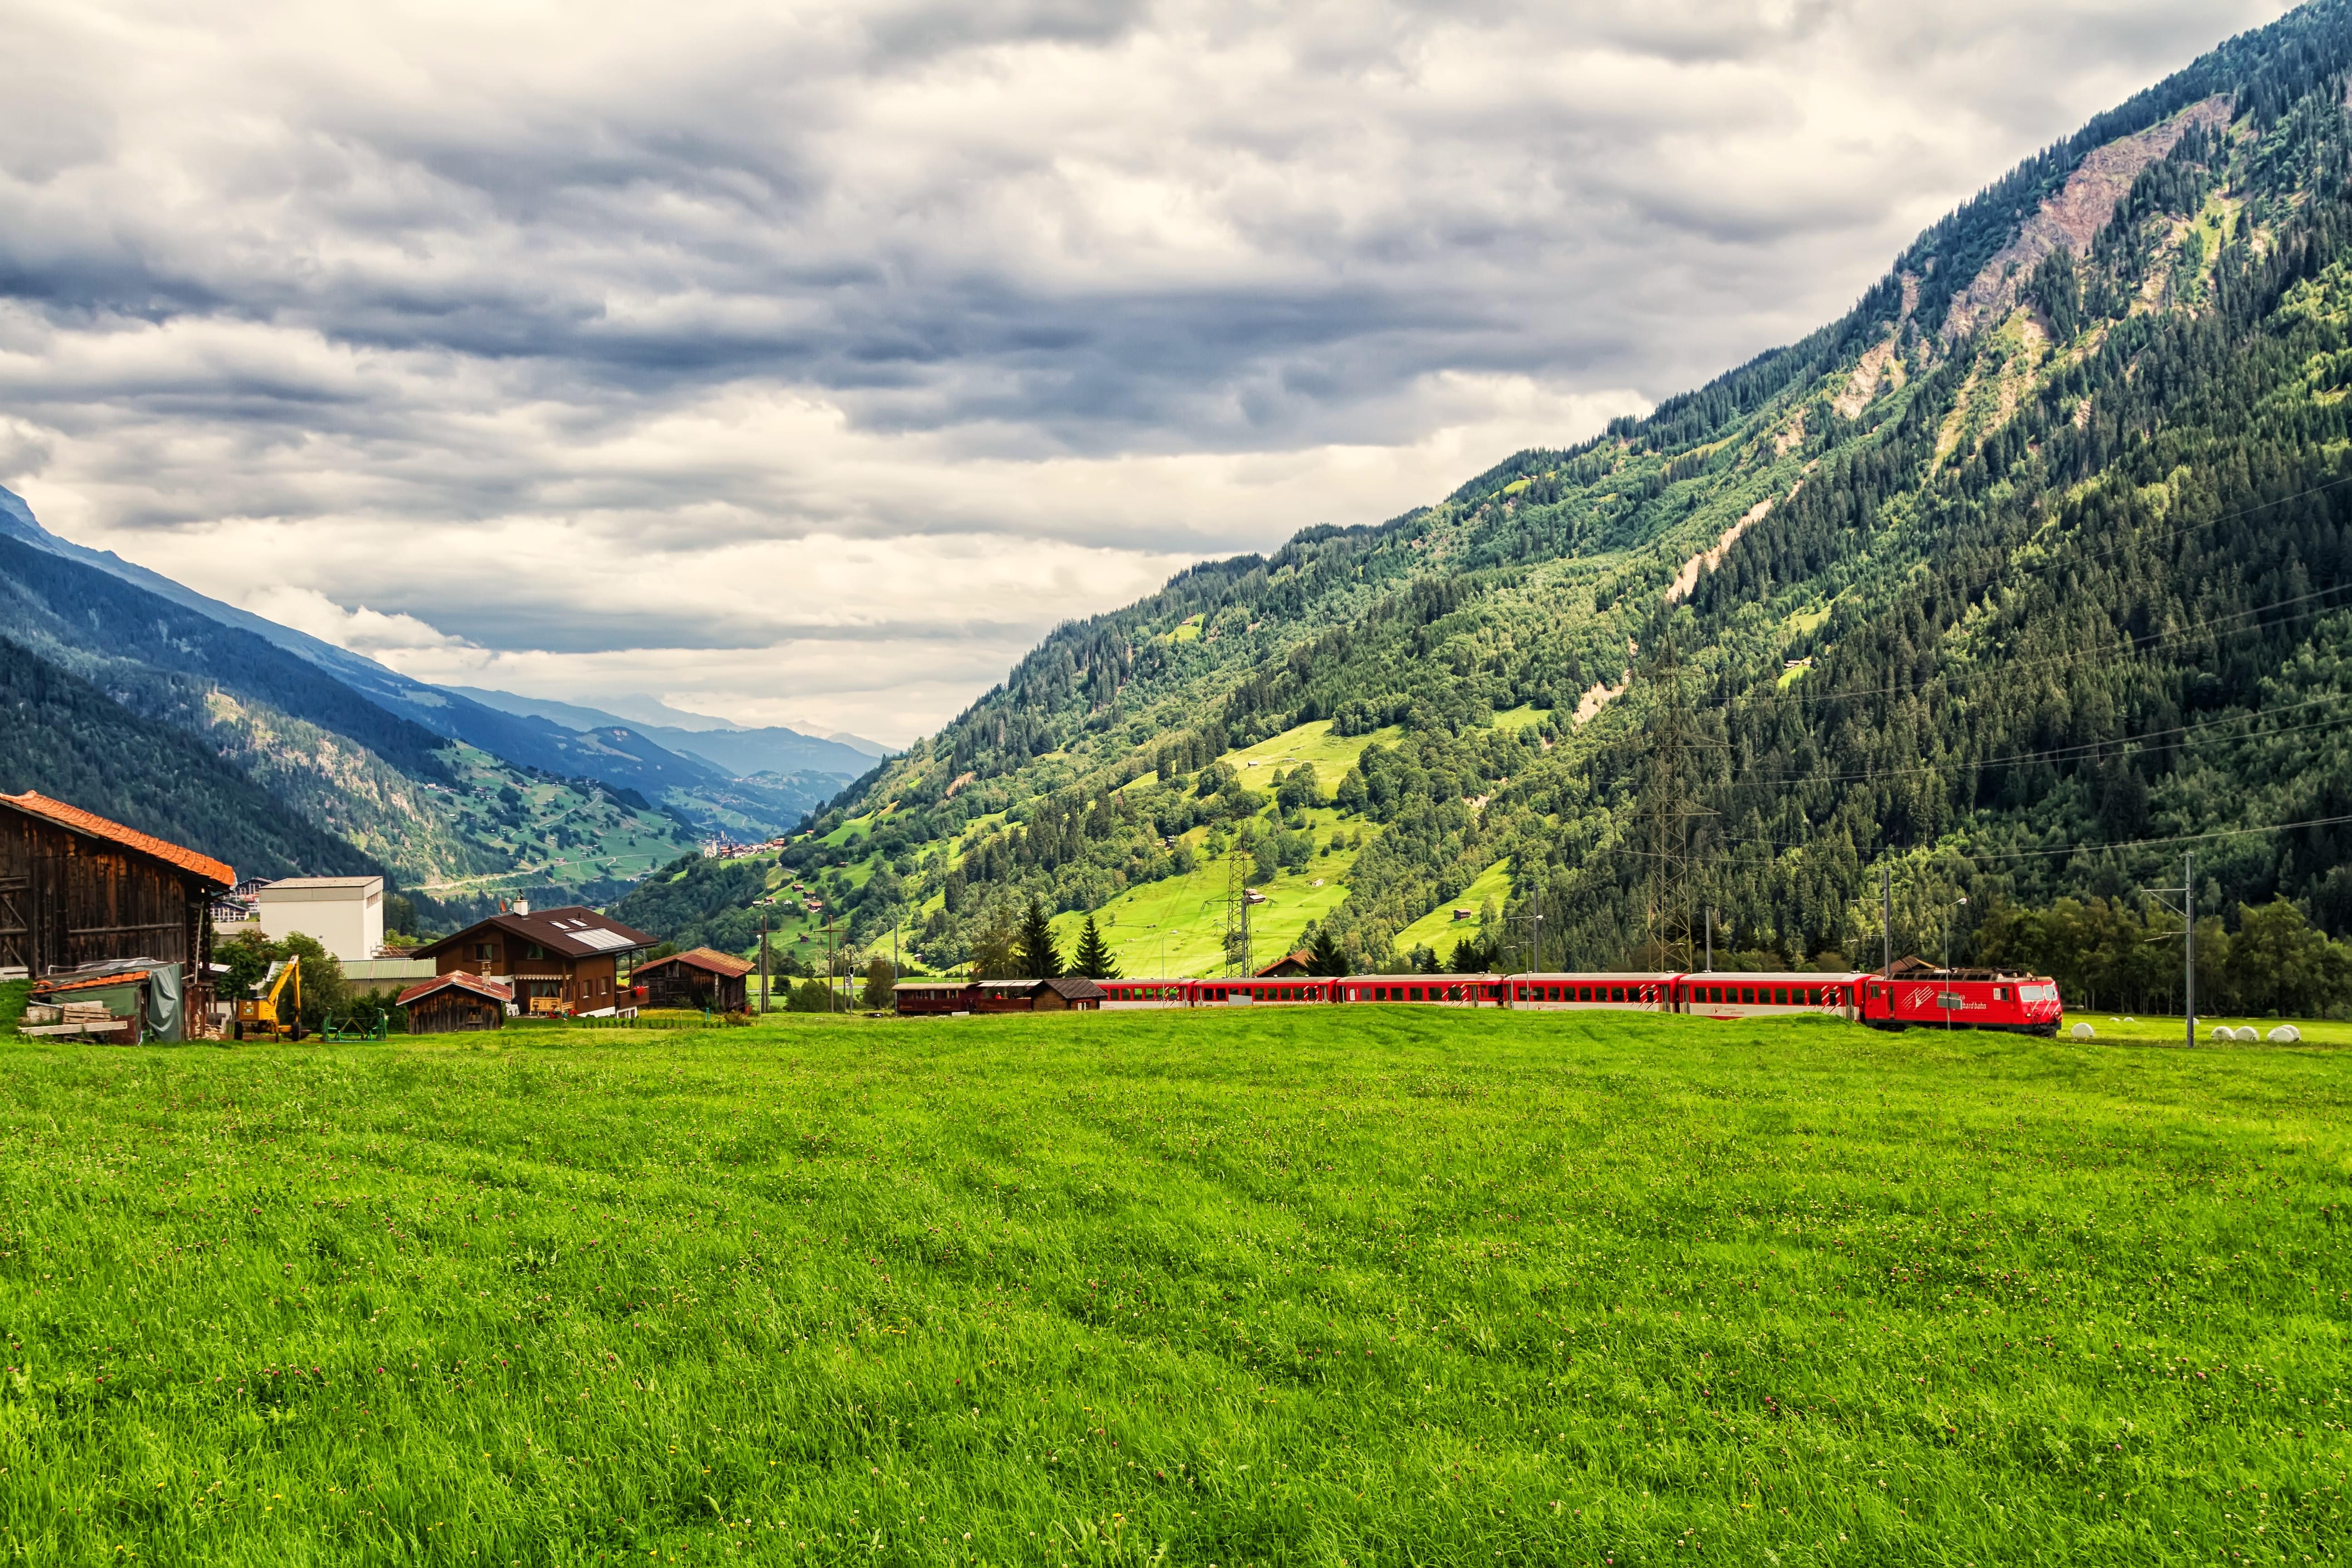 The Glacier Express traveling through the alps